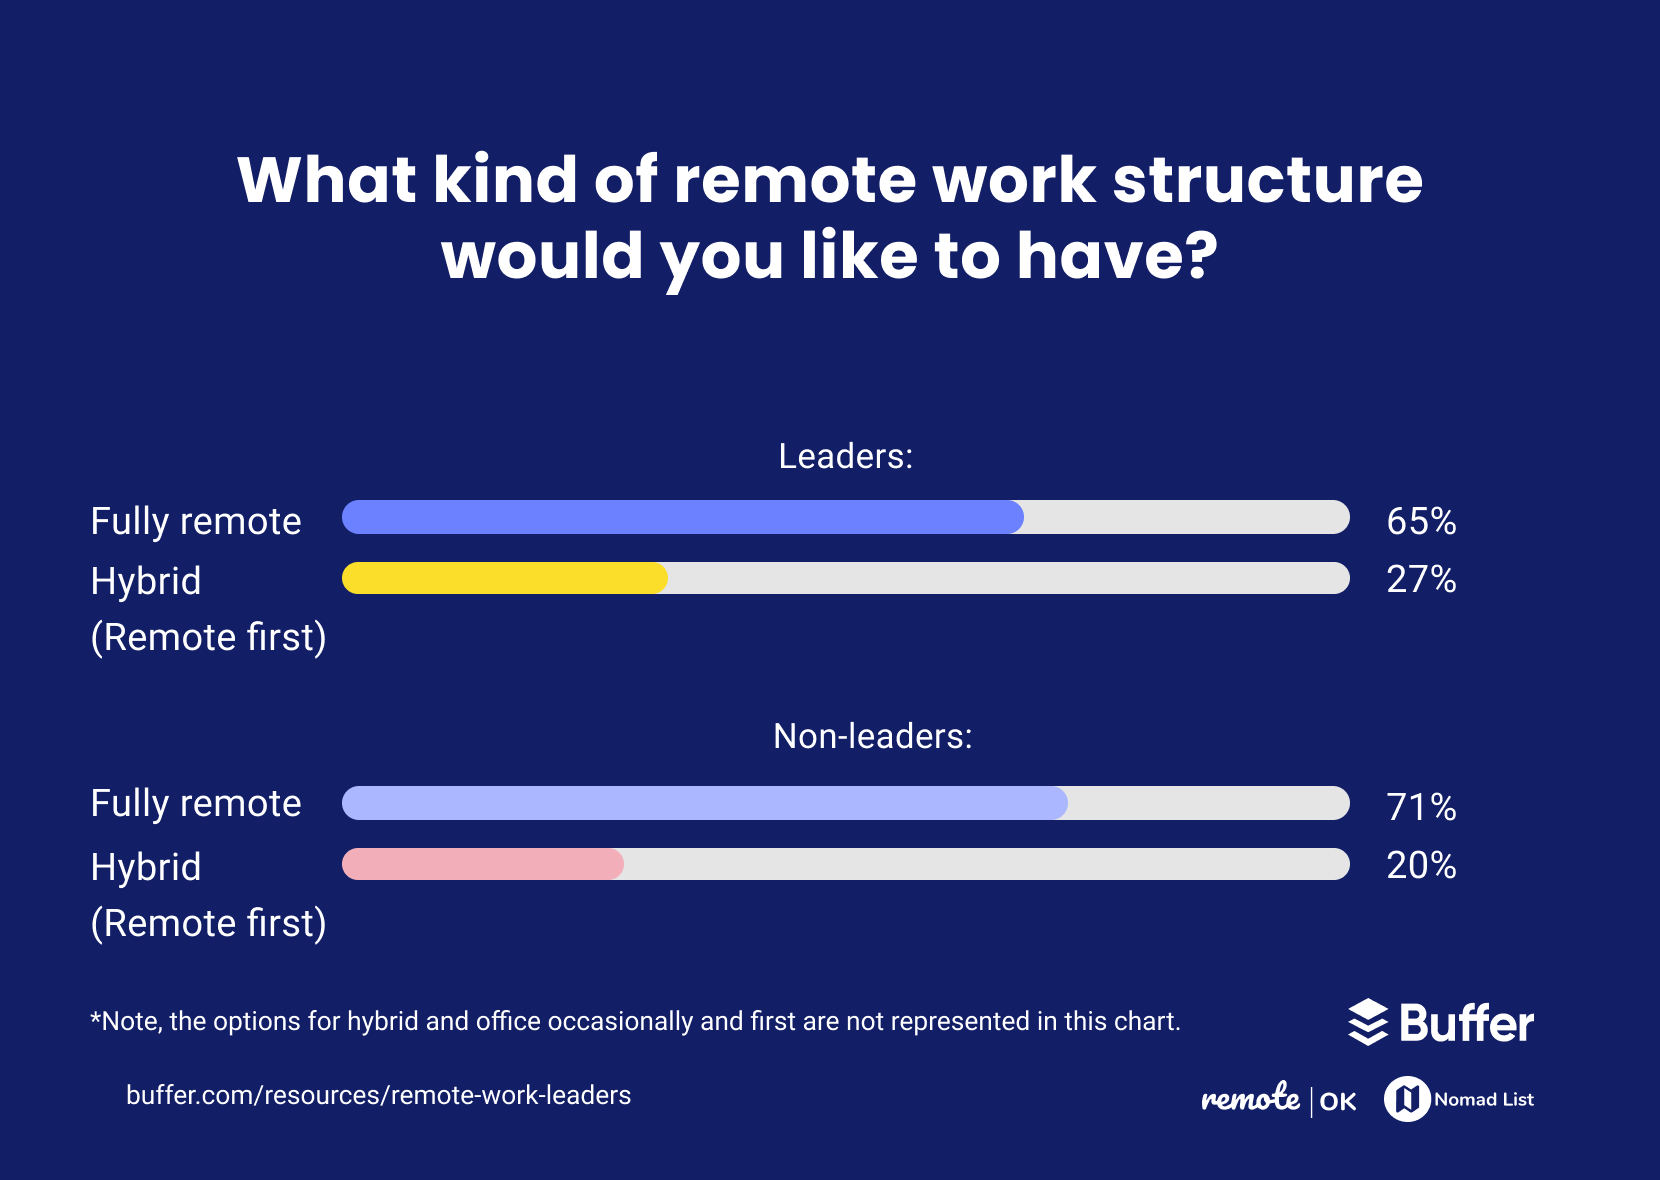 RemoteWorkStructure - How Are Leaders Experiencing Remote Work?